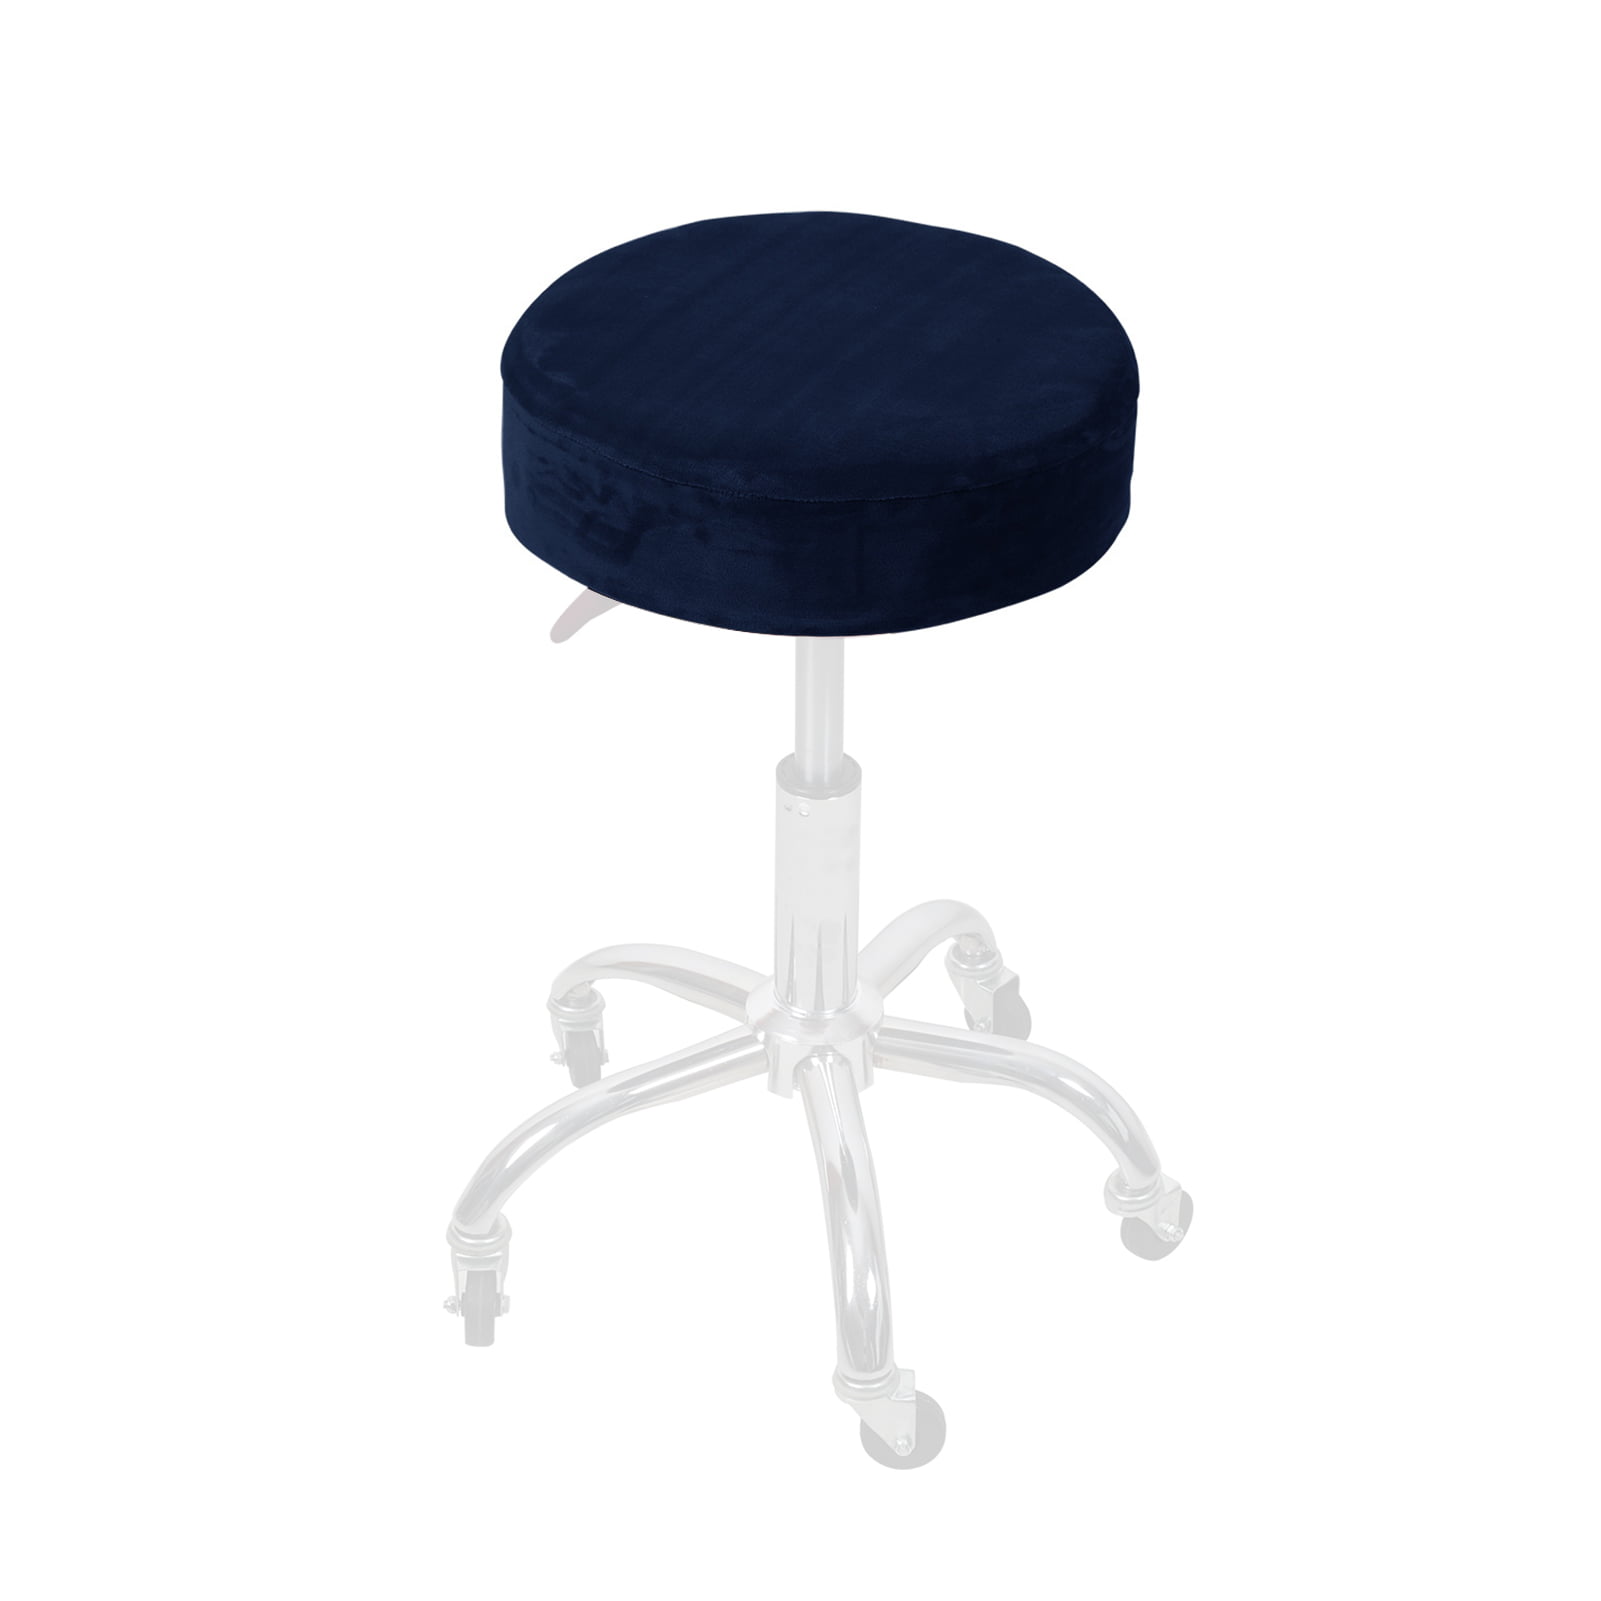 Details about   Chair Cover Bar Stool Covers Elastic Seat Cover Chair Protector Chair Slipcovers 